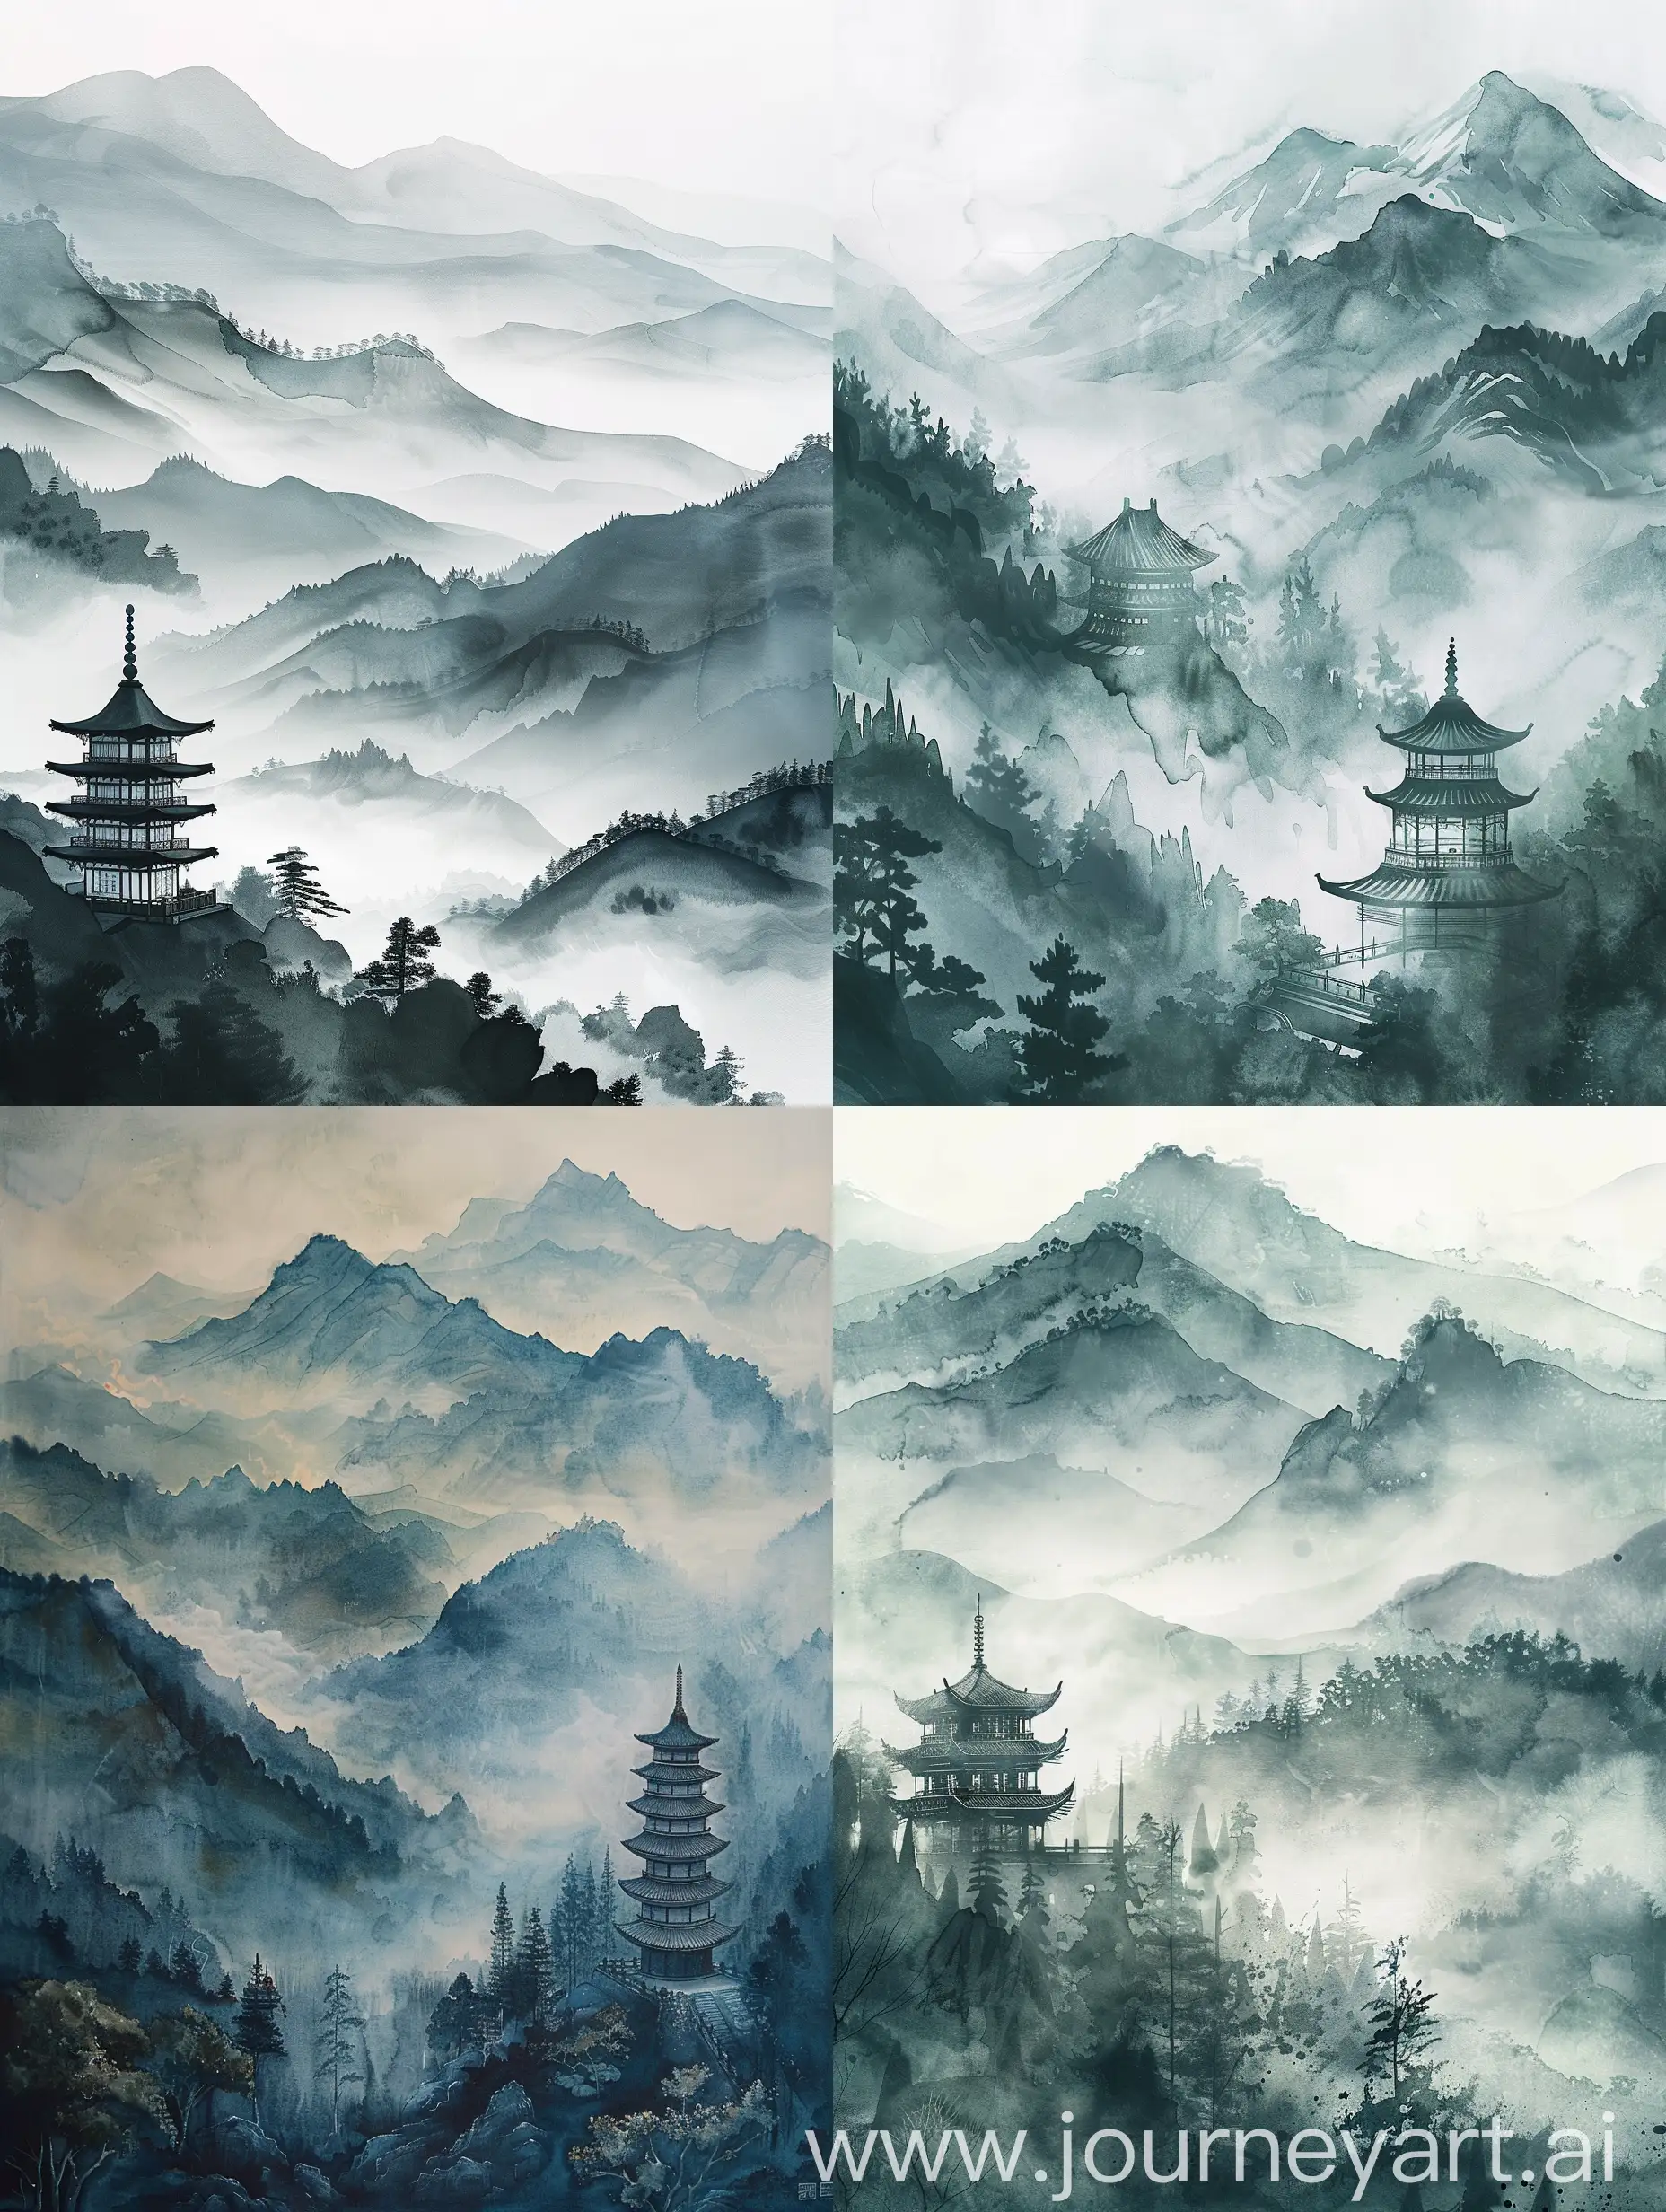 Ancient China landscape painting featuring a serene mountain scene with a traditional Chinese pagoda in the foreground, misty atmosphere, ink wash technique, inspired by the Song Dynasty, detailed brushwork, minimalist color palette